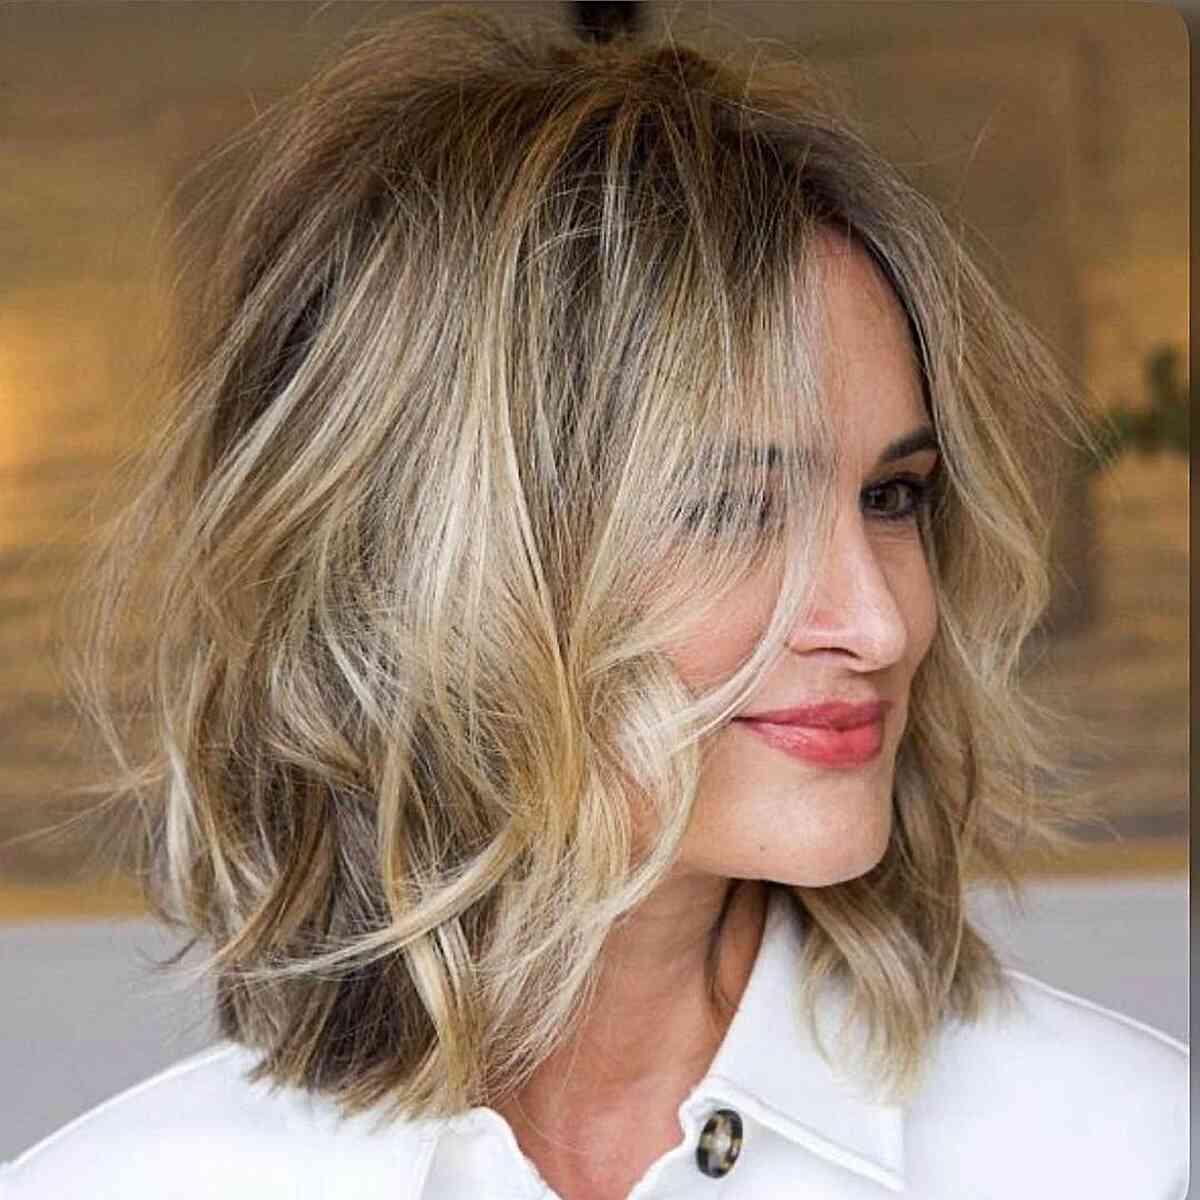 22 Short Messy Hair Ideas To Try in 2023